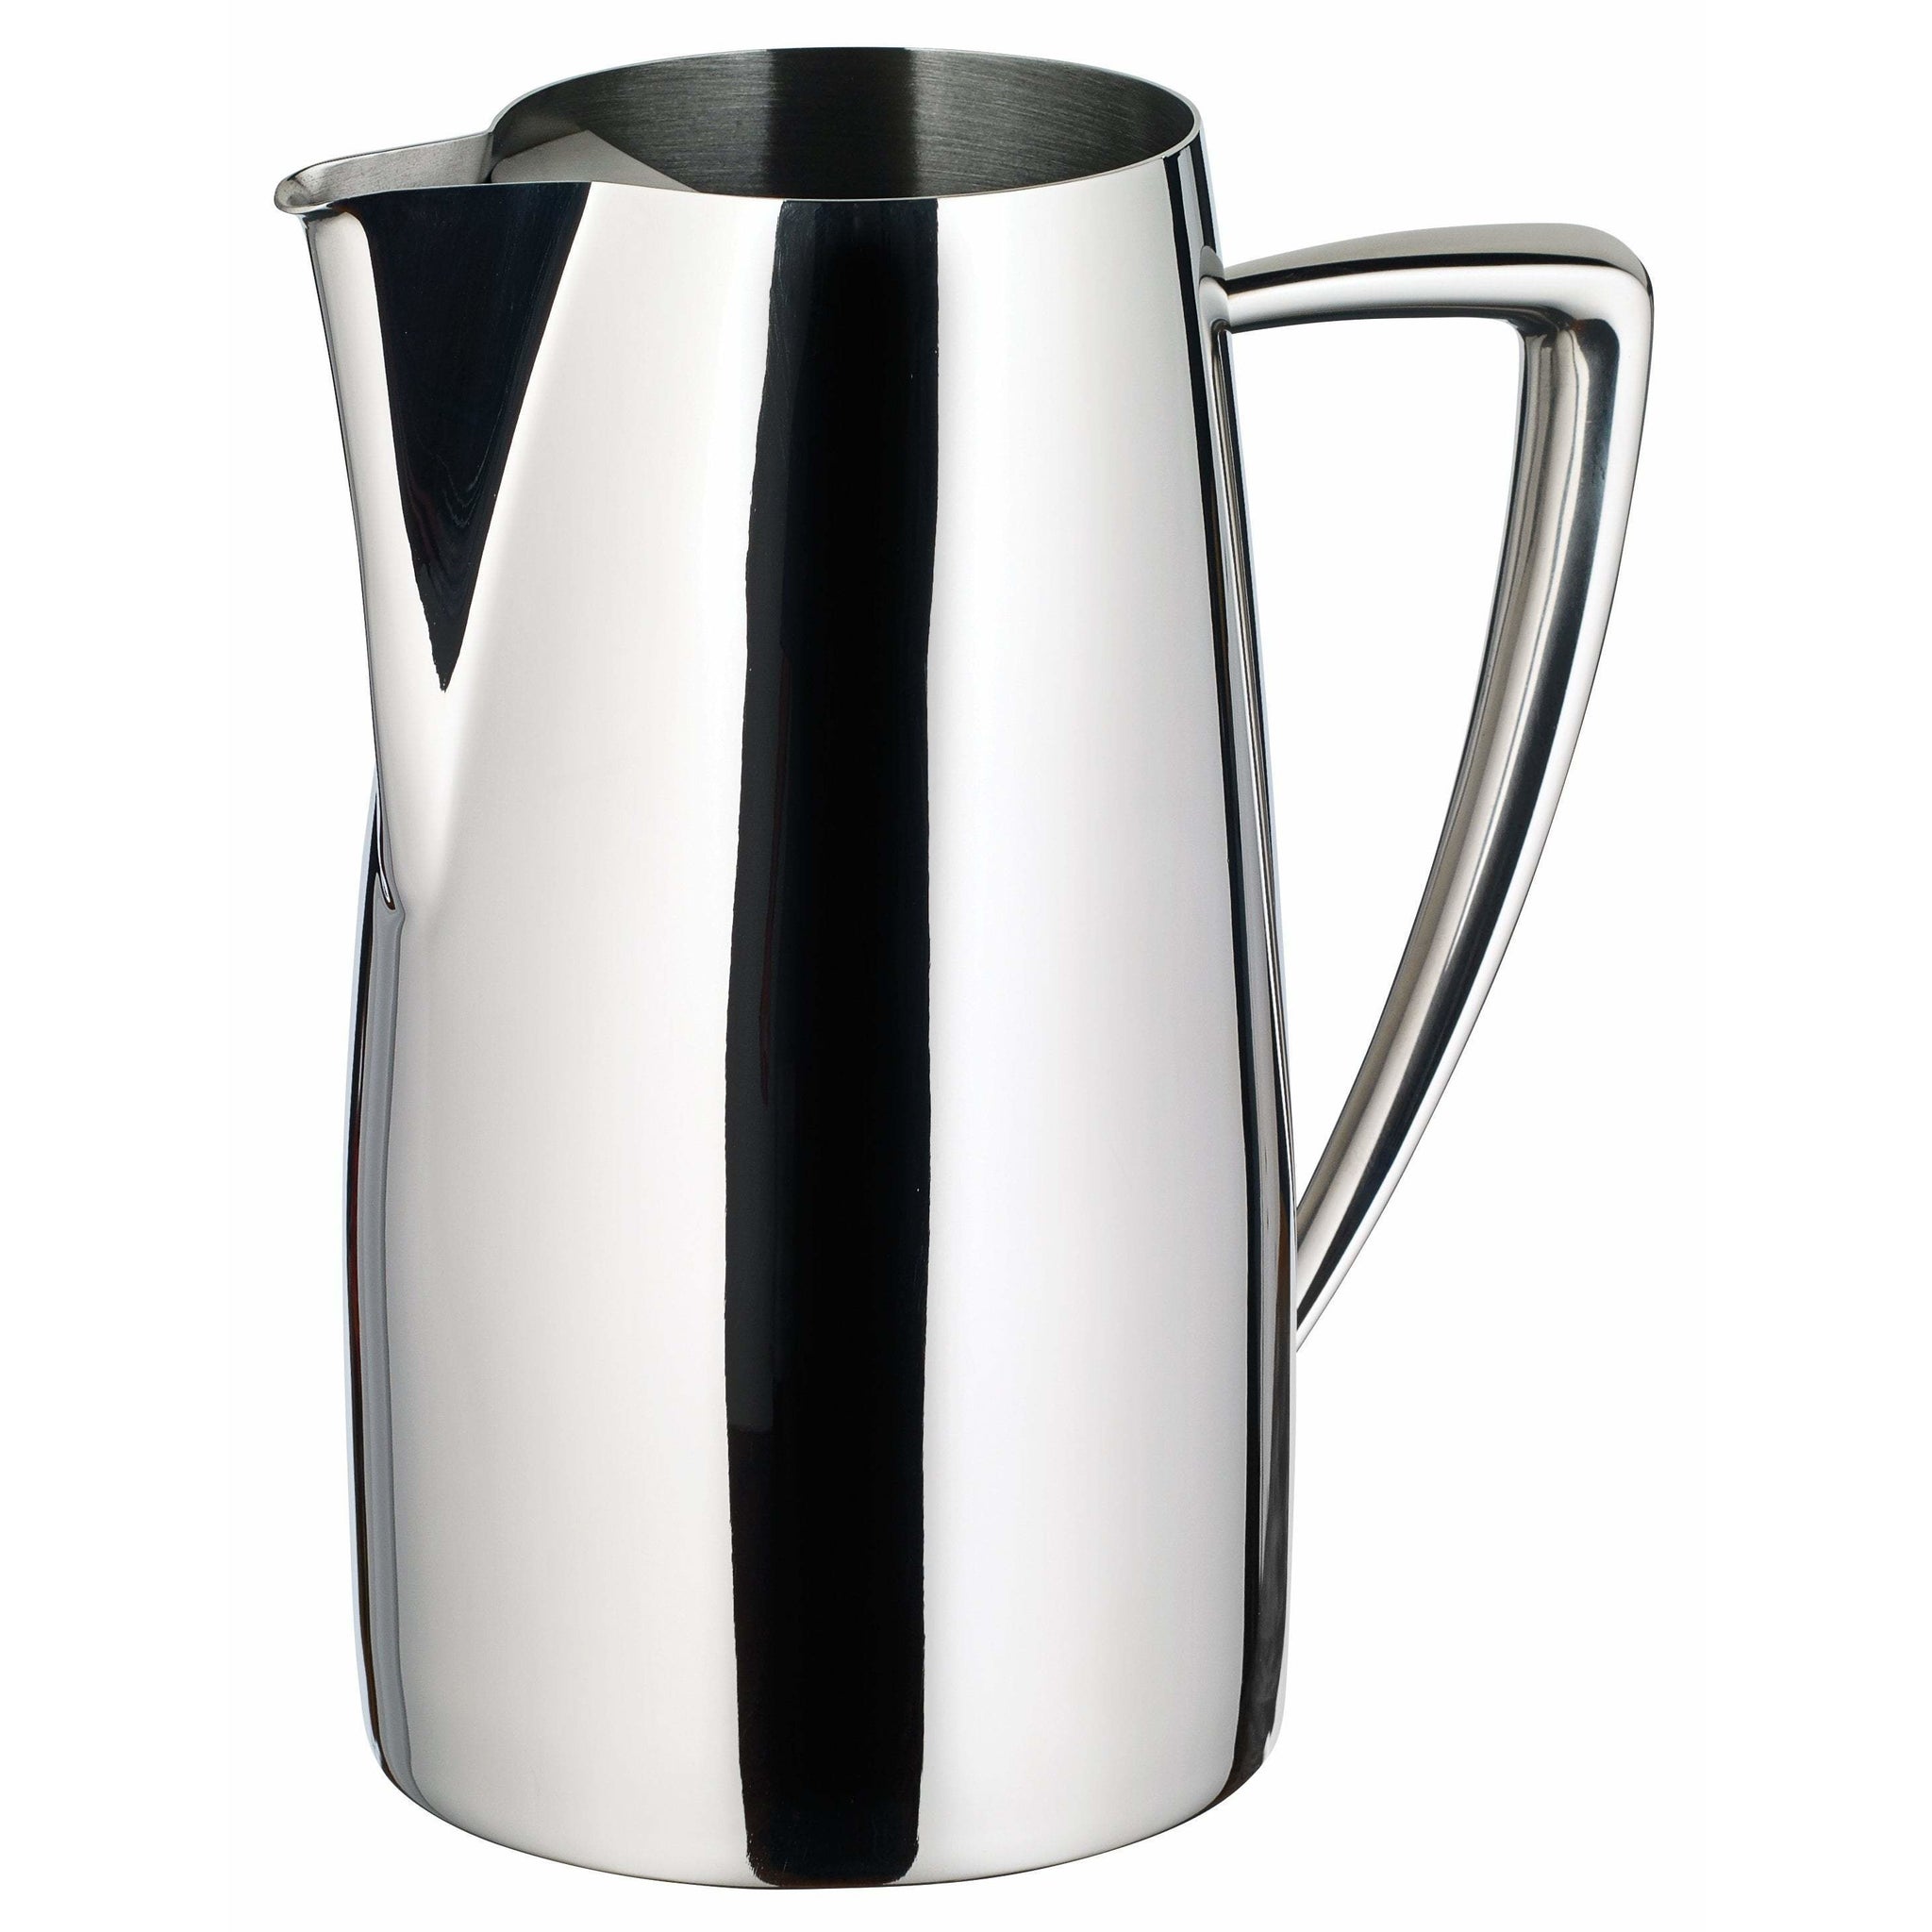 Winco Stainless Steel Water Pitcher with Guard, 64-Ounce